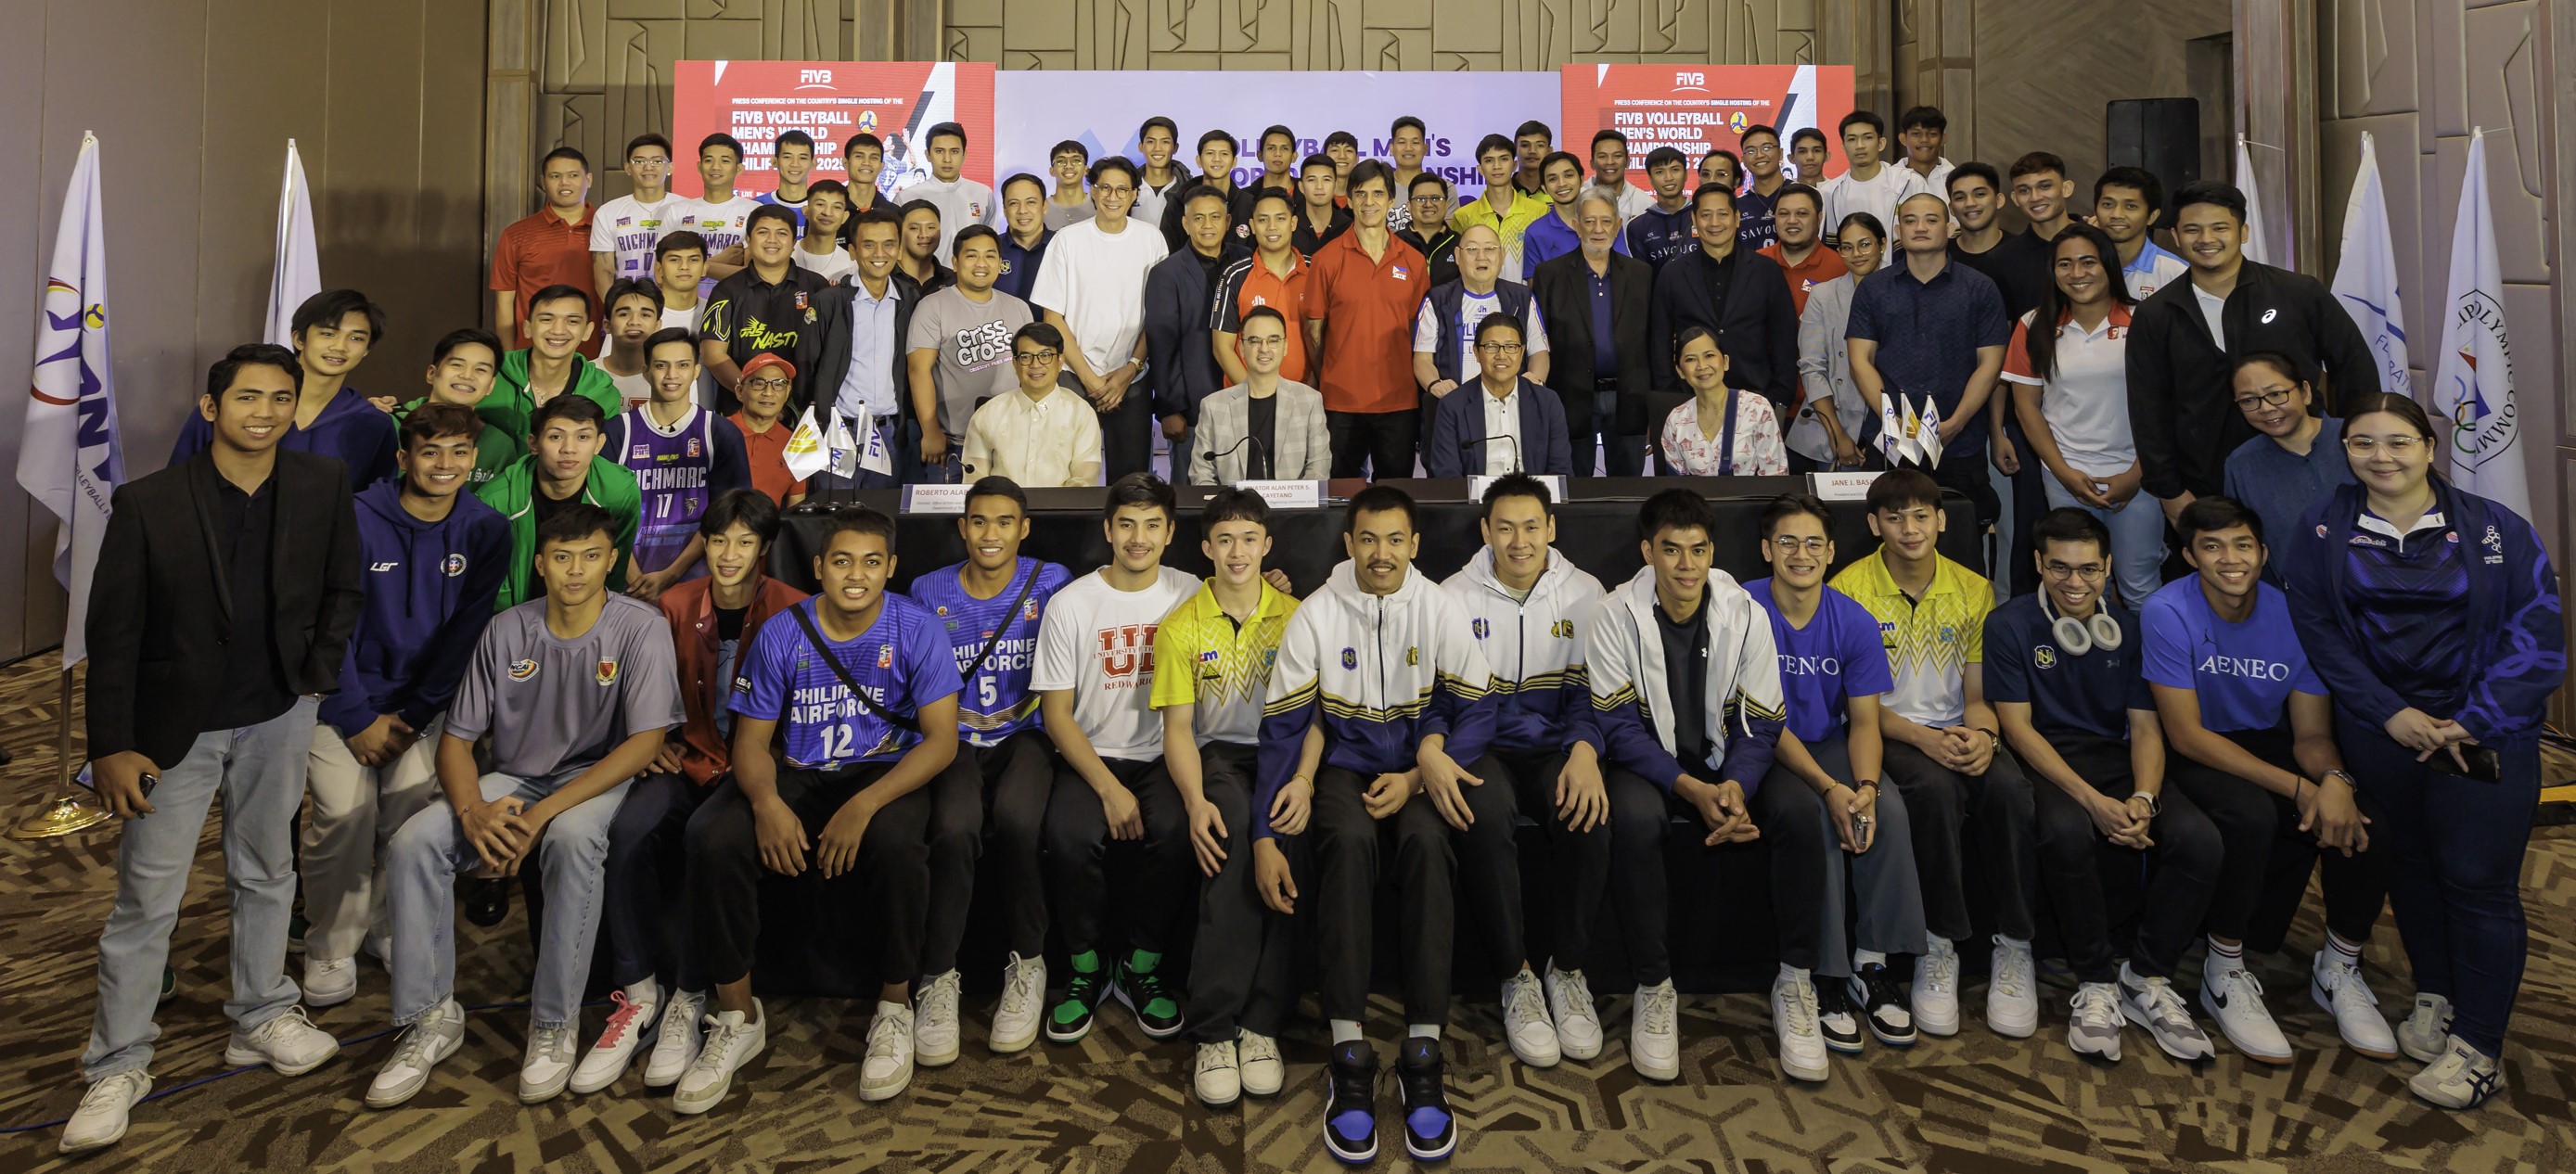 DOT Office of Film and Sports Tourism Director Roberto Alabado III, Sen Alan Peter S. Cayetano, PNVF President Ramon Suzara, and MediaQuest Holdings Inc. and Cignal TV President and CEO Jane Jimenez Basas pose with top UAAP, NCAA men’s volleyball players at the 2025 FIVB Men's World Championship press event.